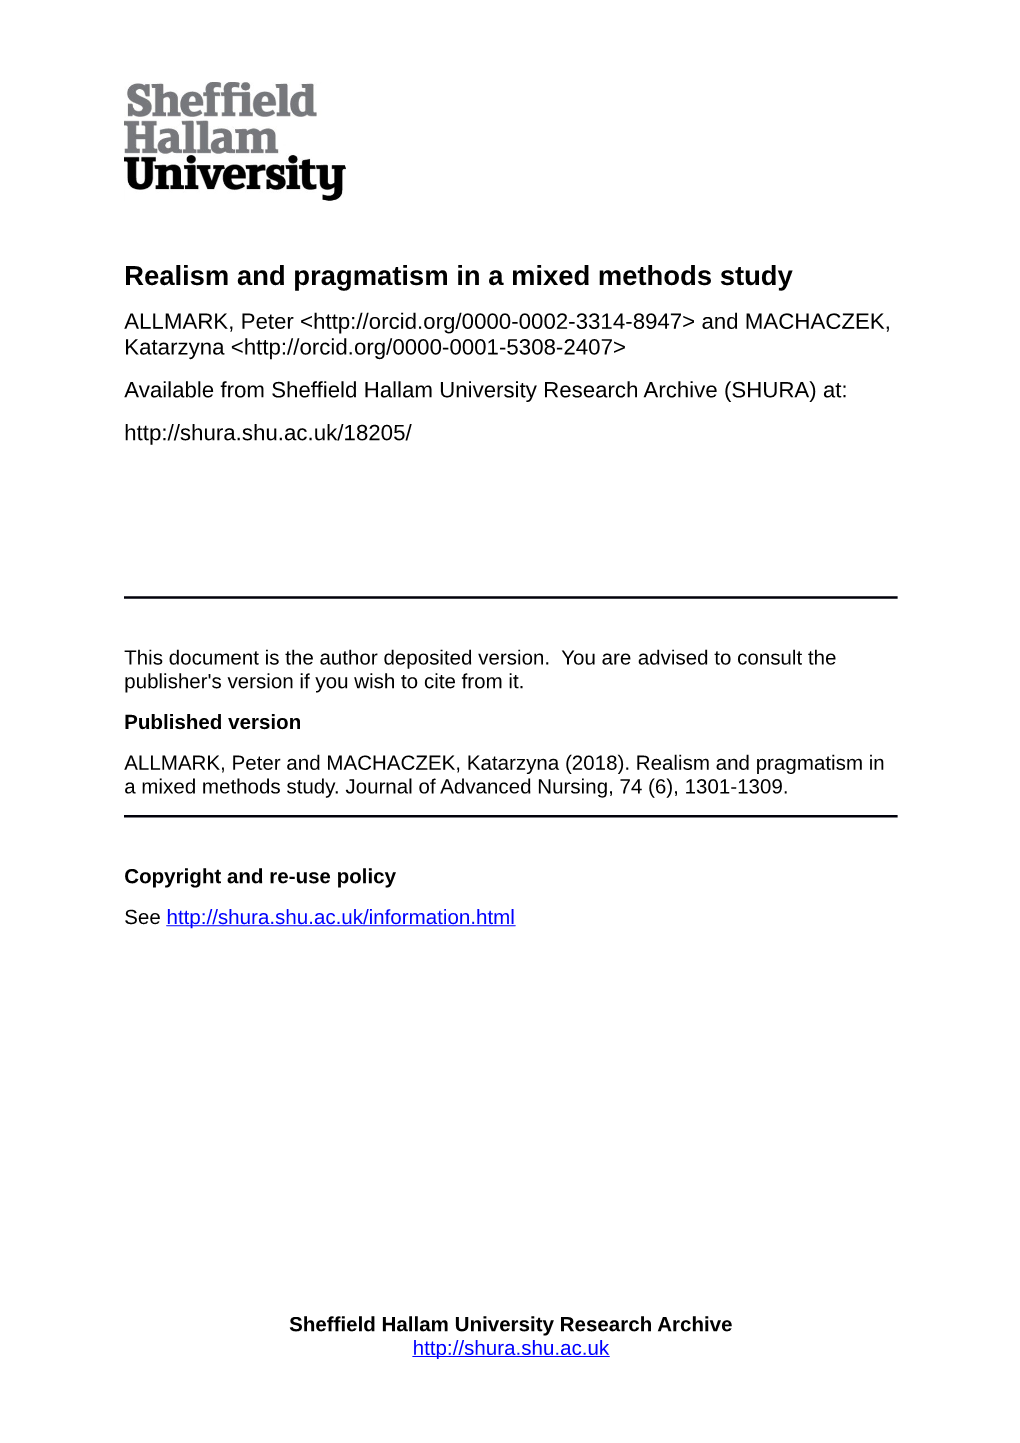 Realism and Pragmatism in a Mixed Methods Study